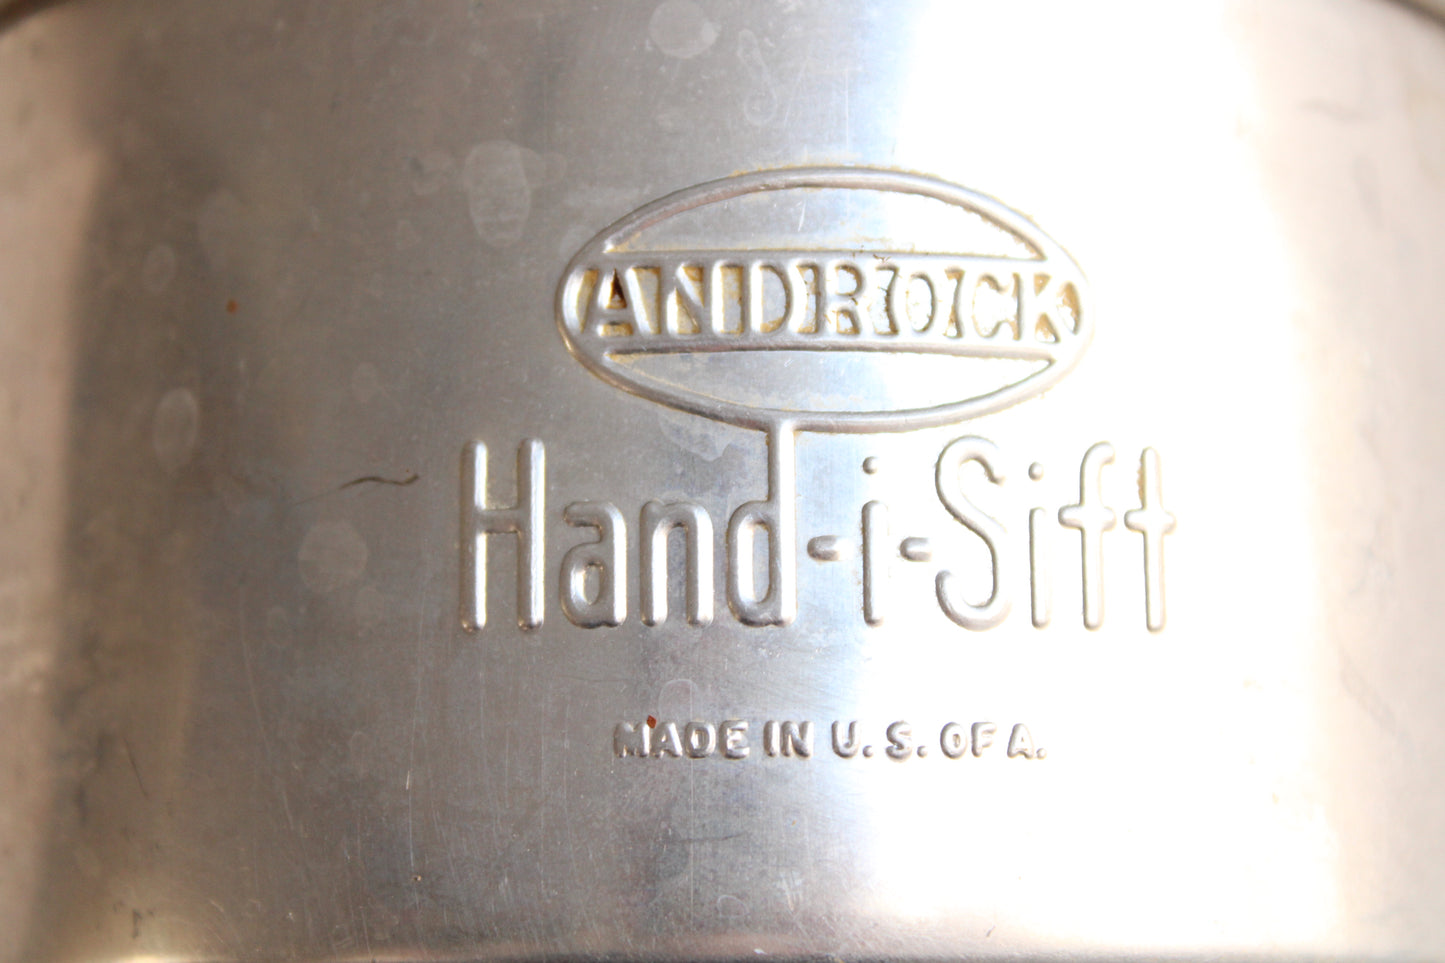 Vintage 1930s 1940s HandiSift Flour Sifter